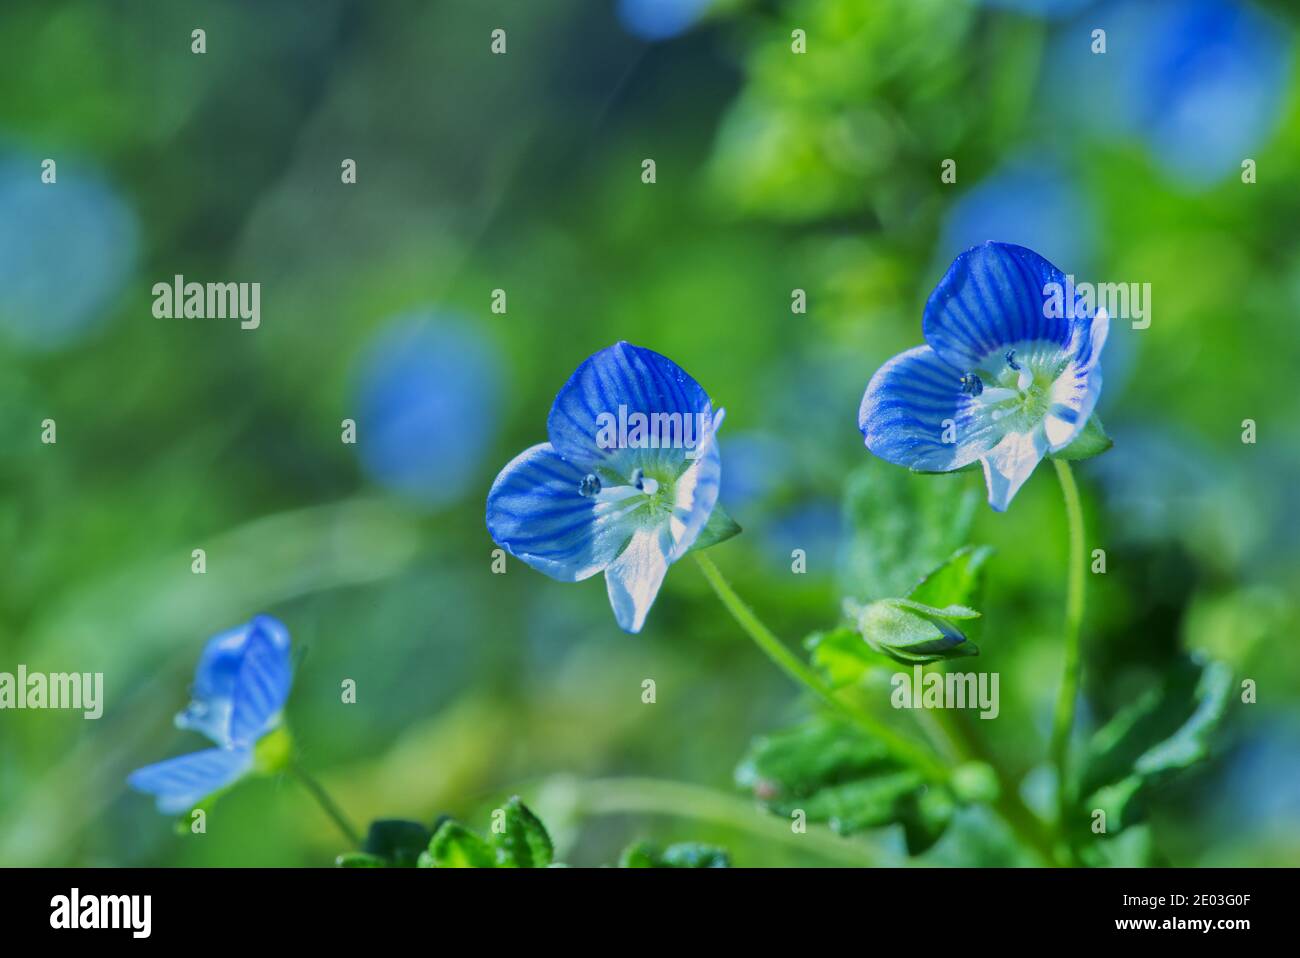 Closeup of common speedwell or veronica arvensis, blue wildflower on green blur background Stock Photo